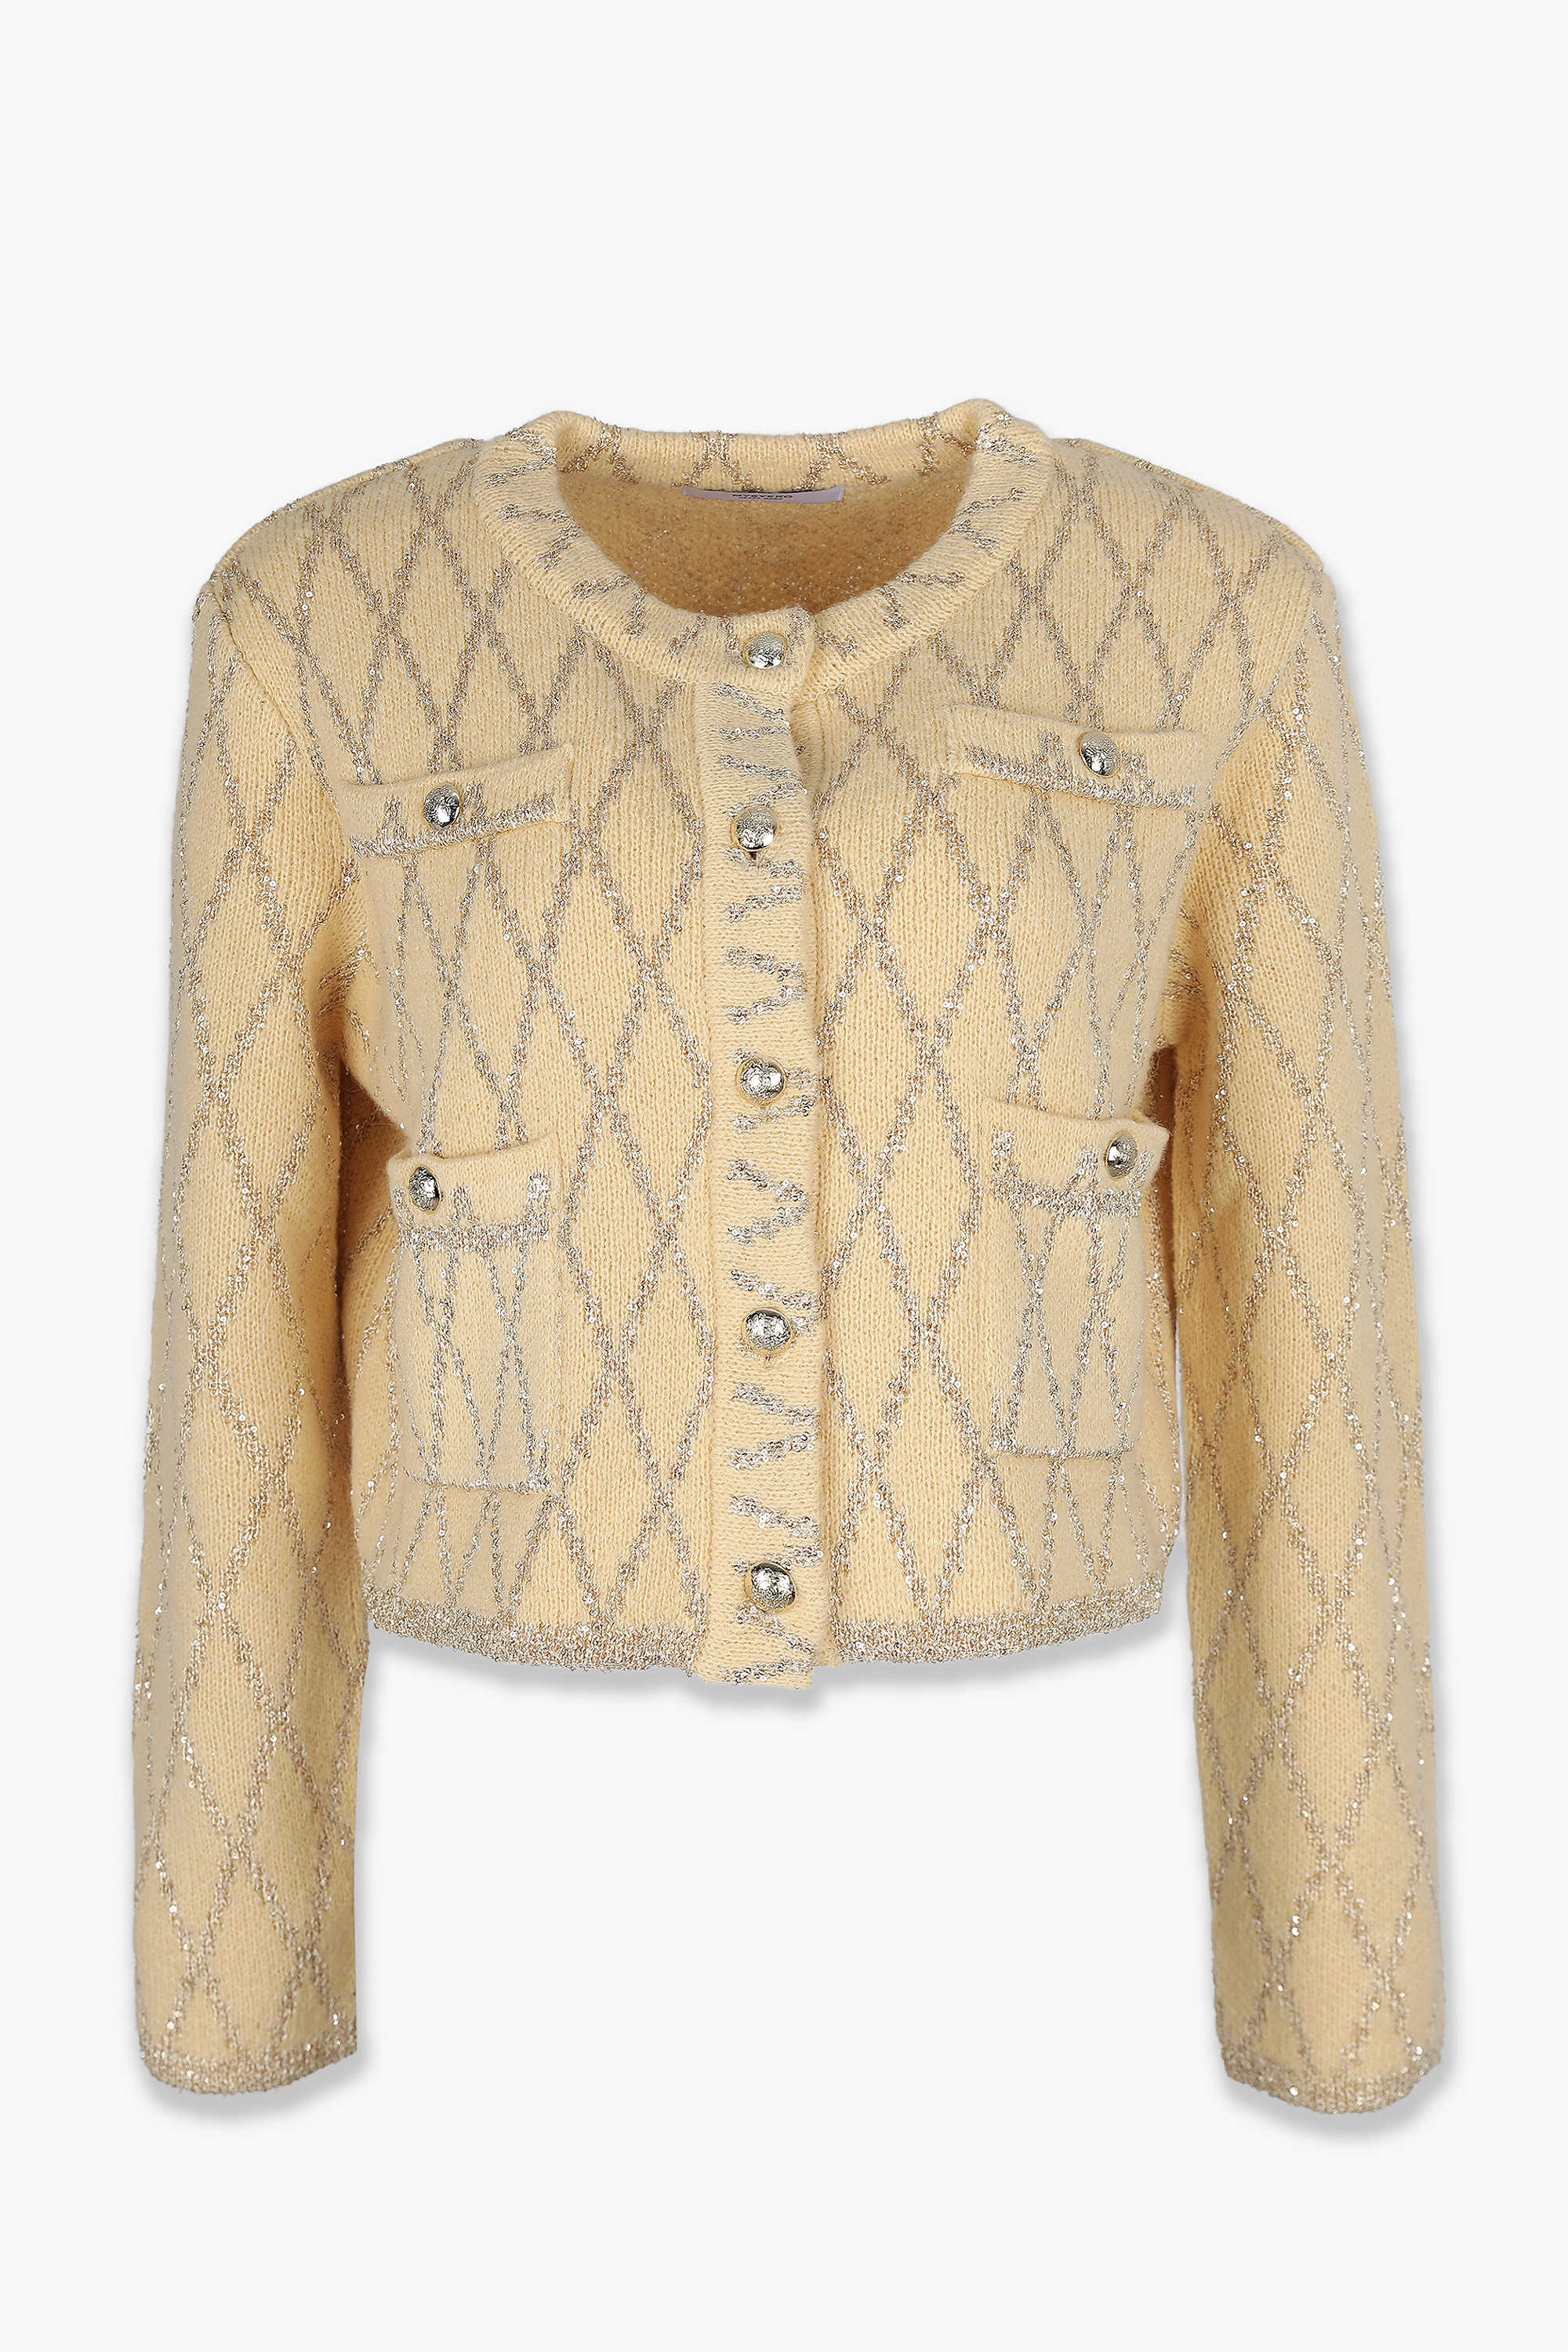 HIGH QUALITY LINE - MYEYEKO 23 SPRING COLLECTION / SEQUIN DIA KNIT JACKET (BUTTER YELLOW)